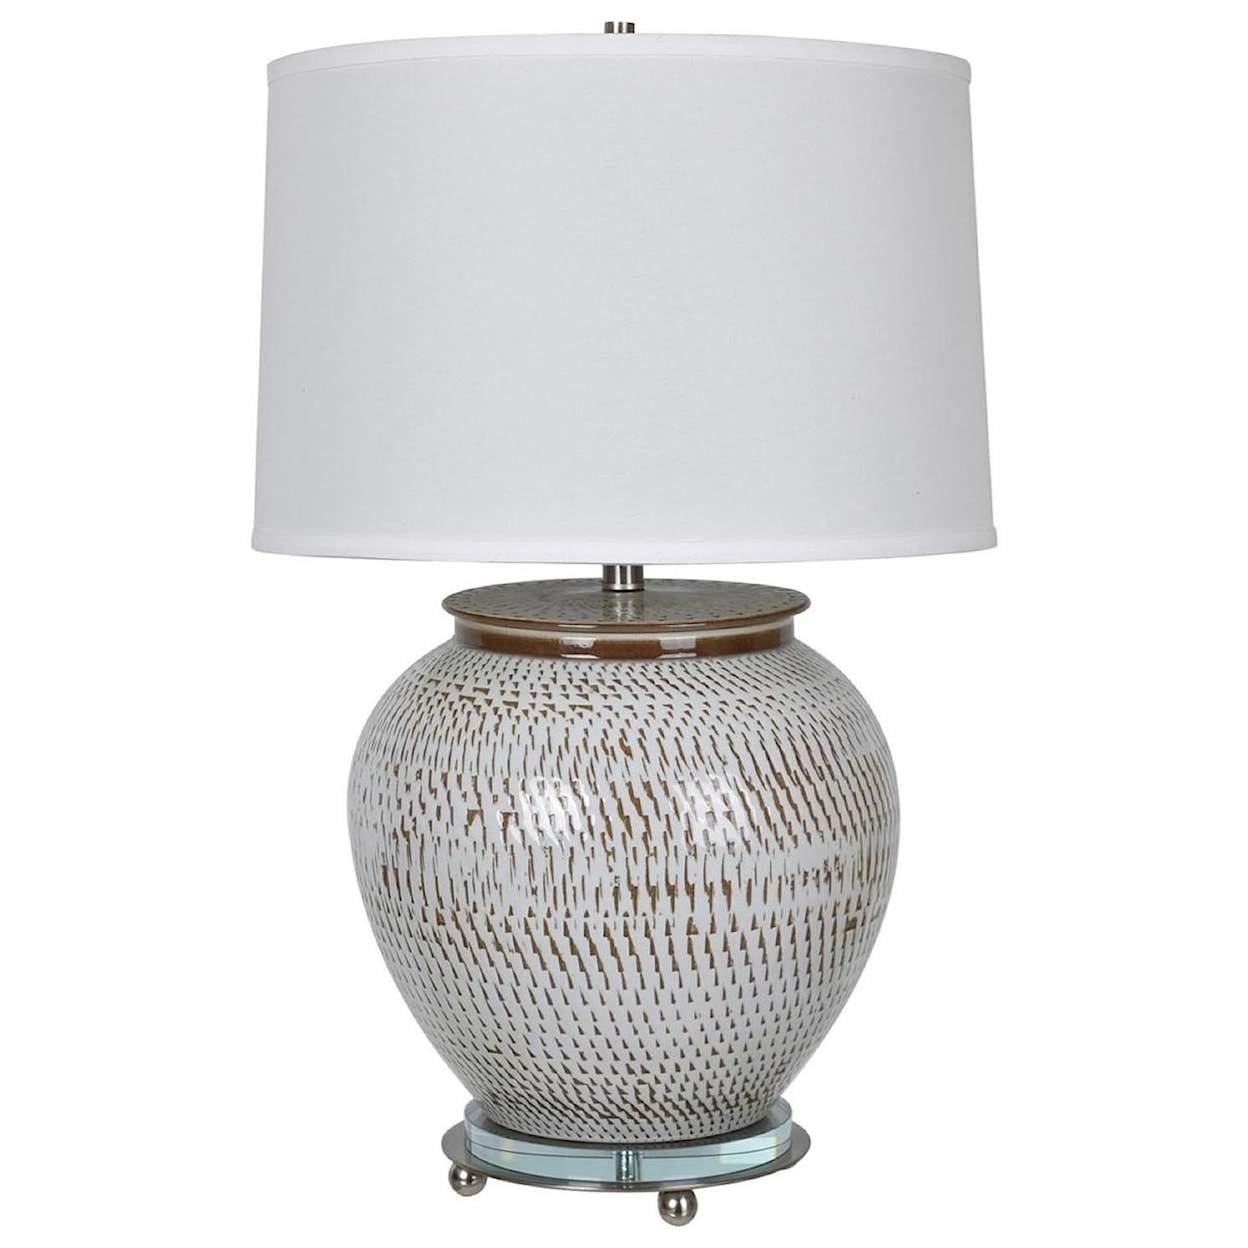 Crestview Collection Lighting Lise Table Lamp